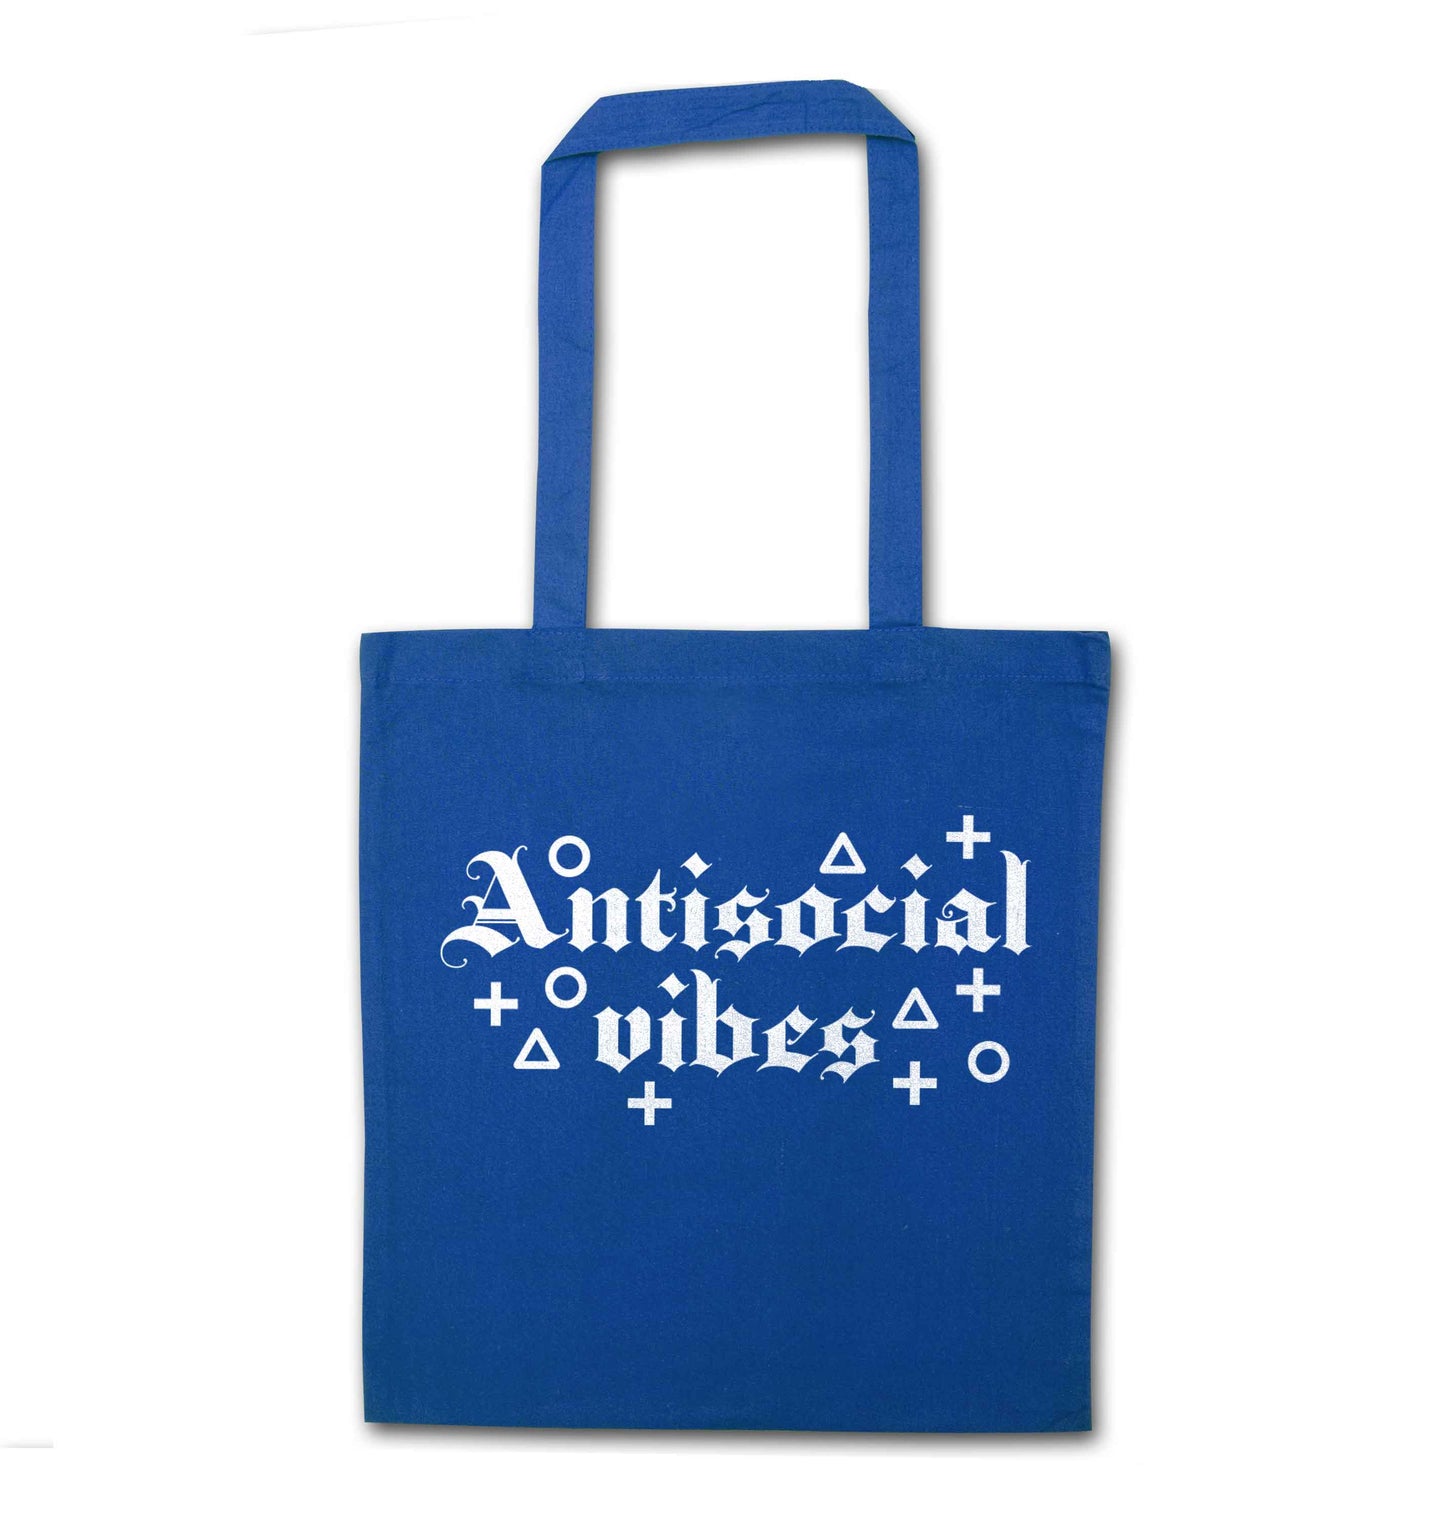 Antisocial vibes blue tote bag